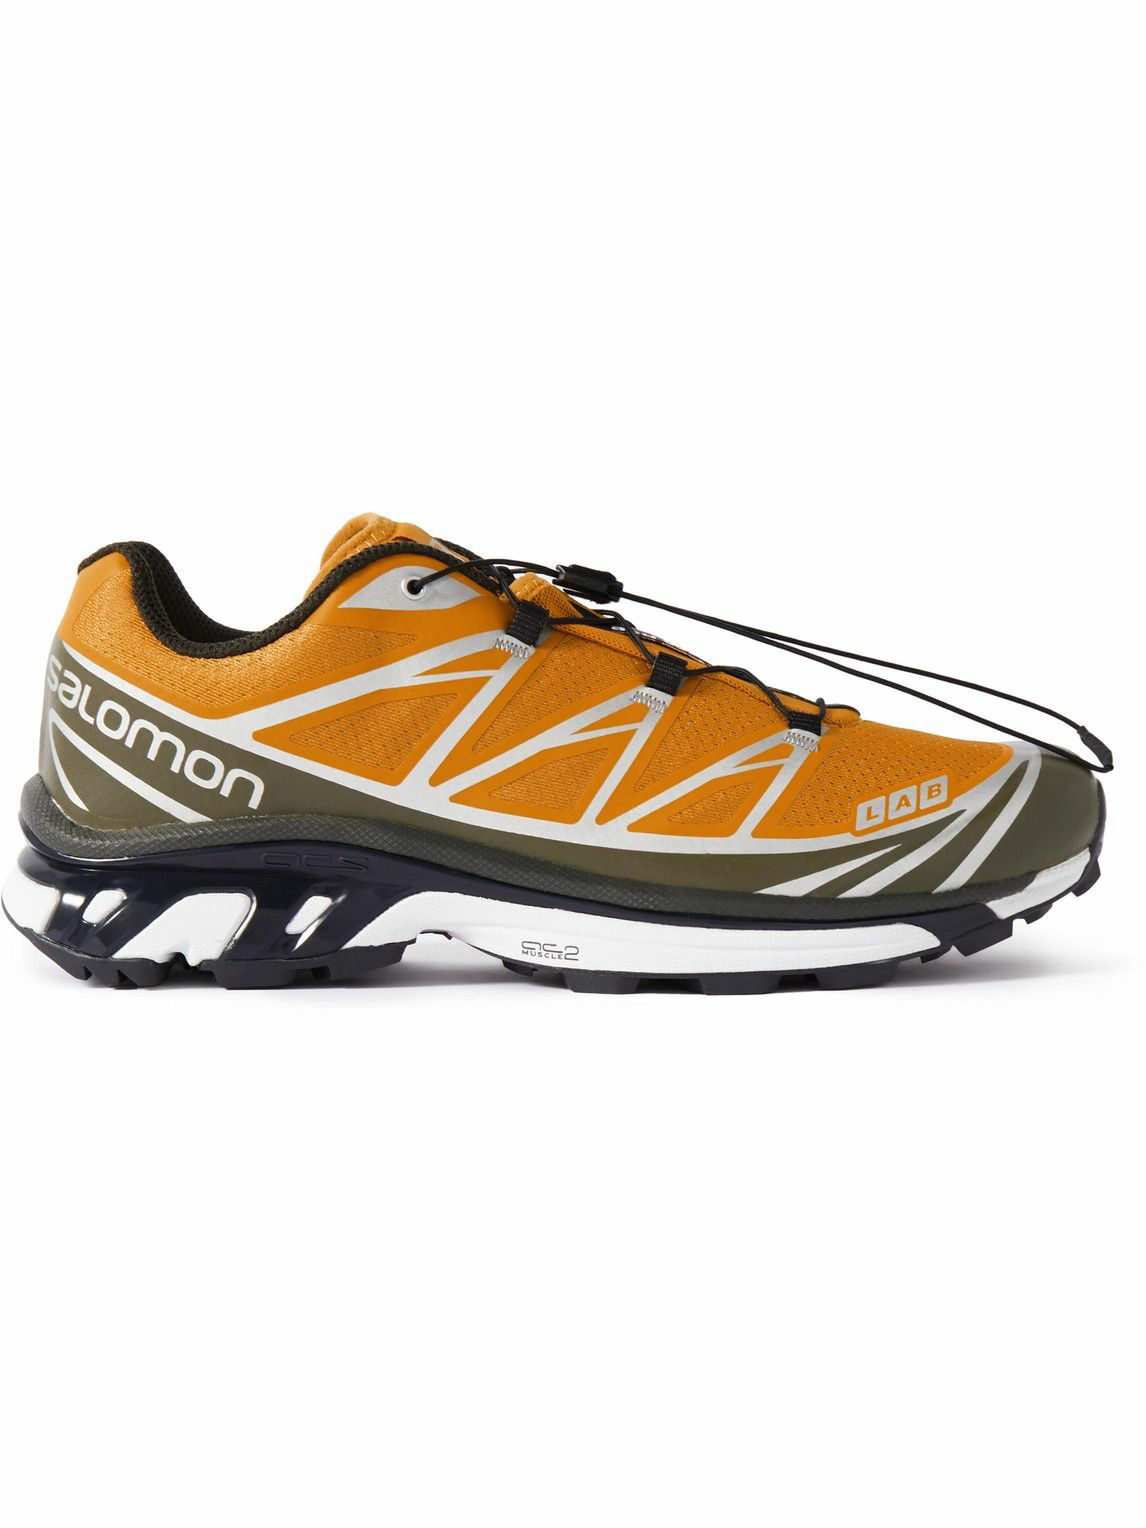 And Wander - XT-6 and Rubber Sneakers - Orange and